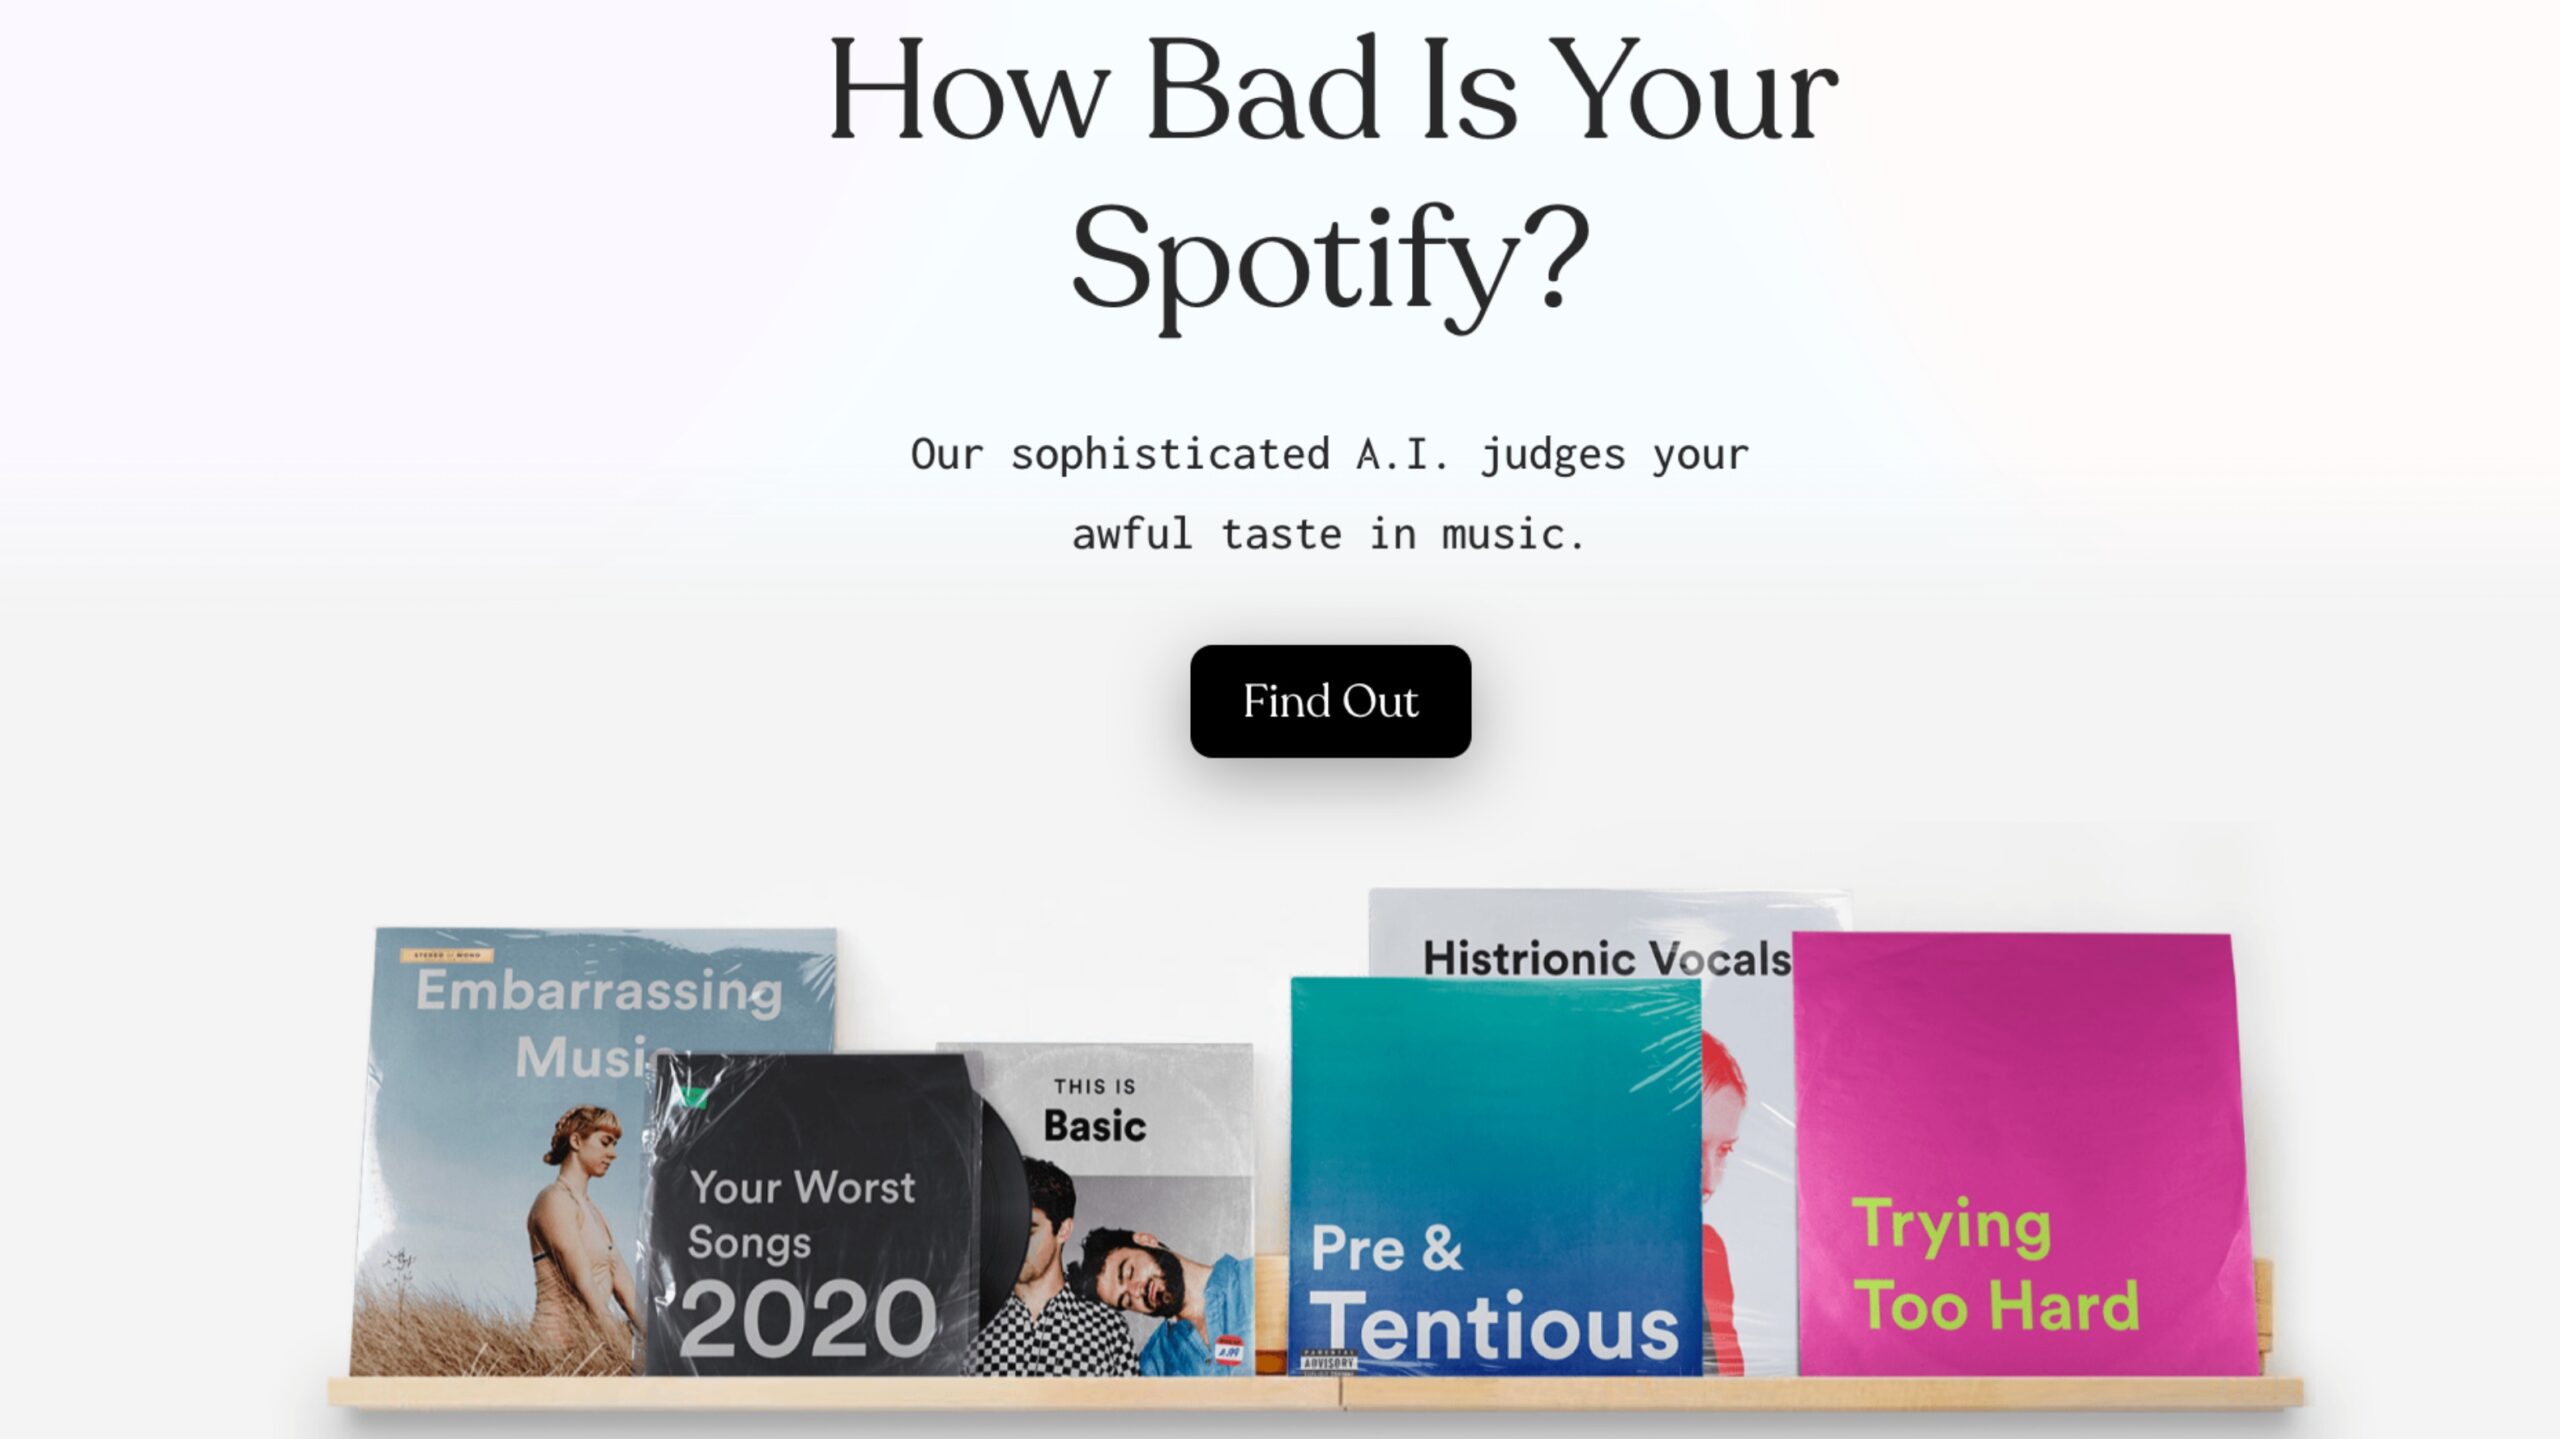 What AI thinks of my Spotify listening habits : r/truespotify